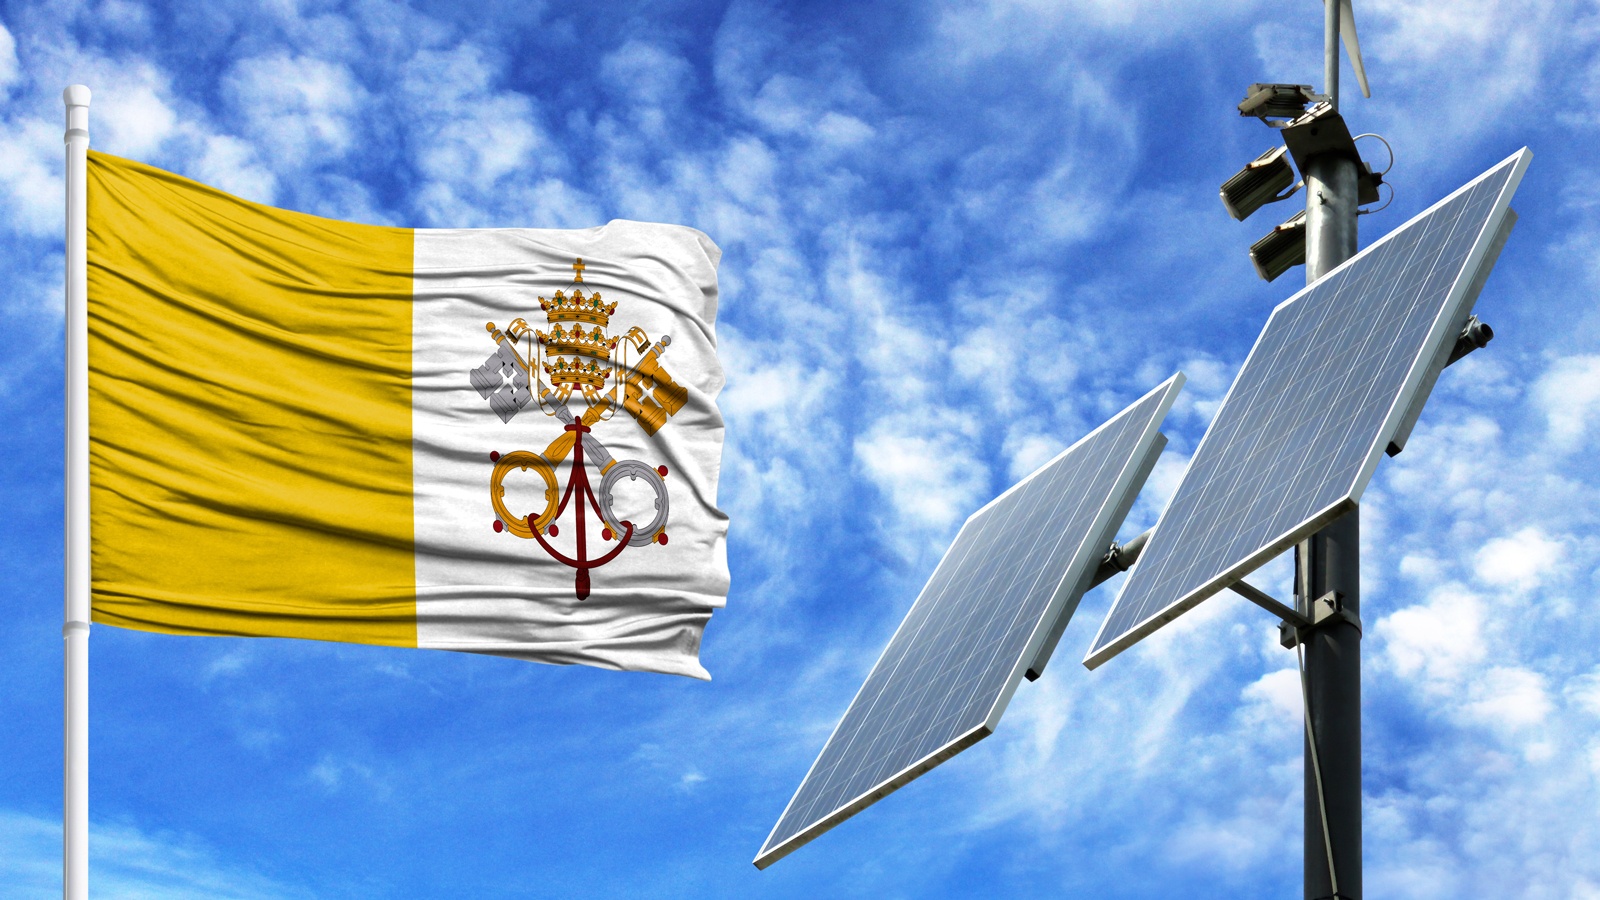 Vatican City to take a stand on climate change by going 100% solar